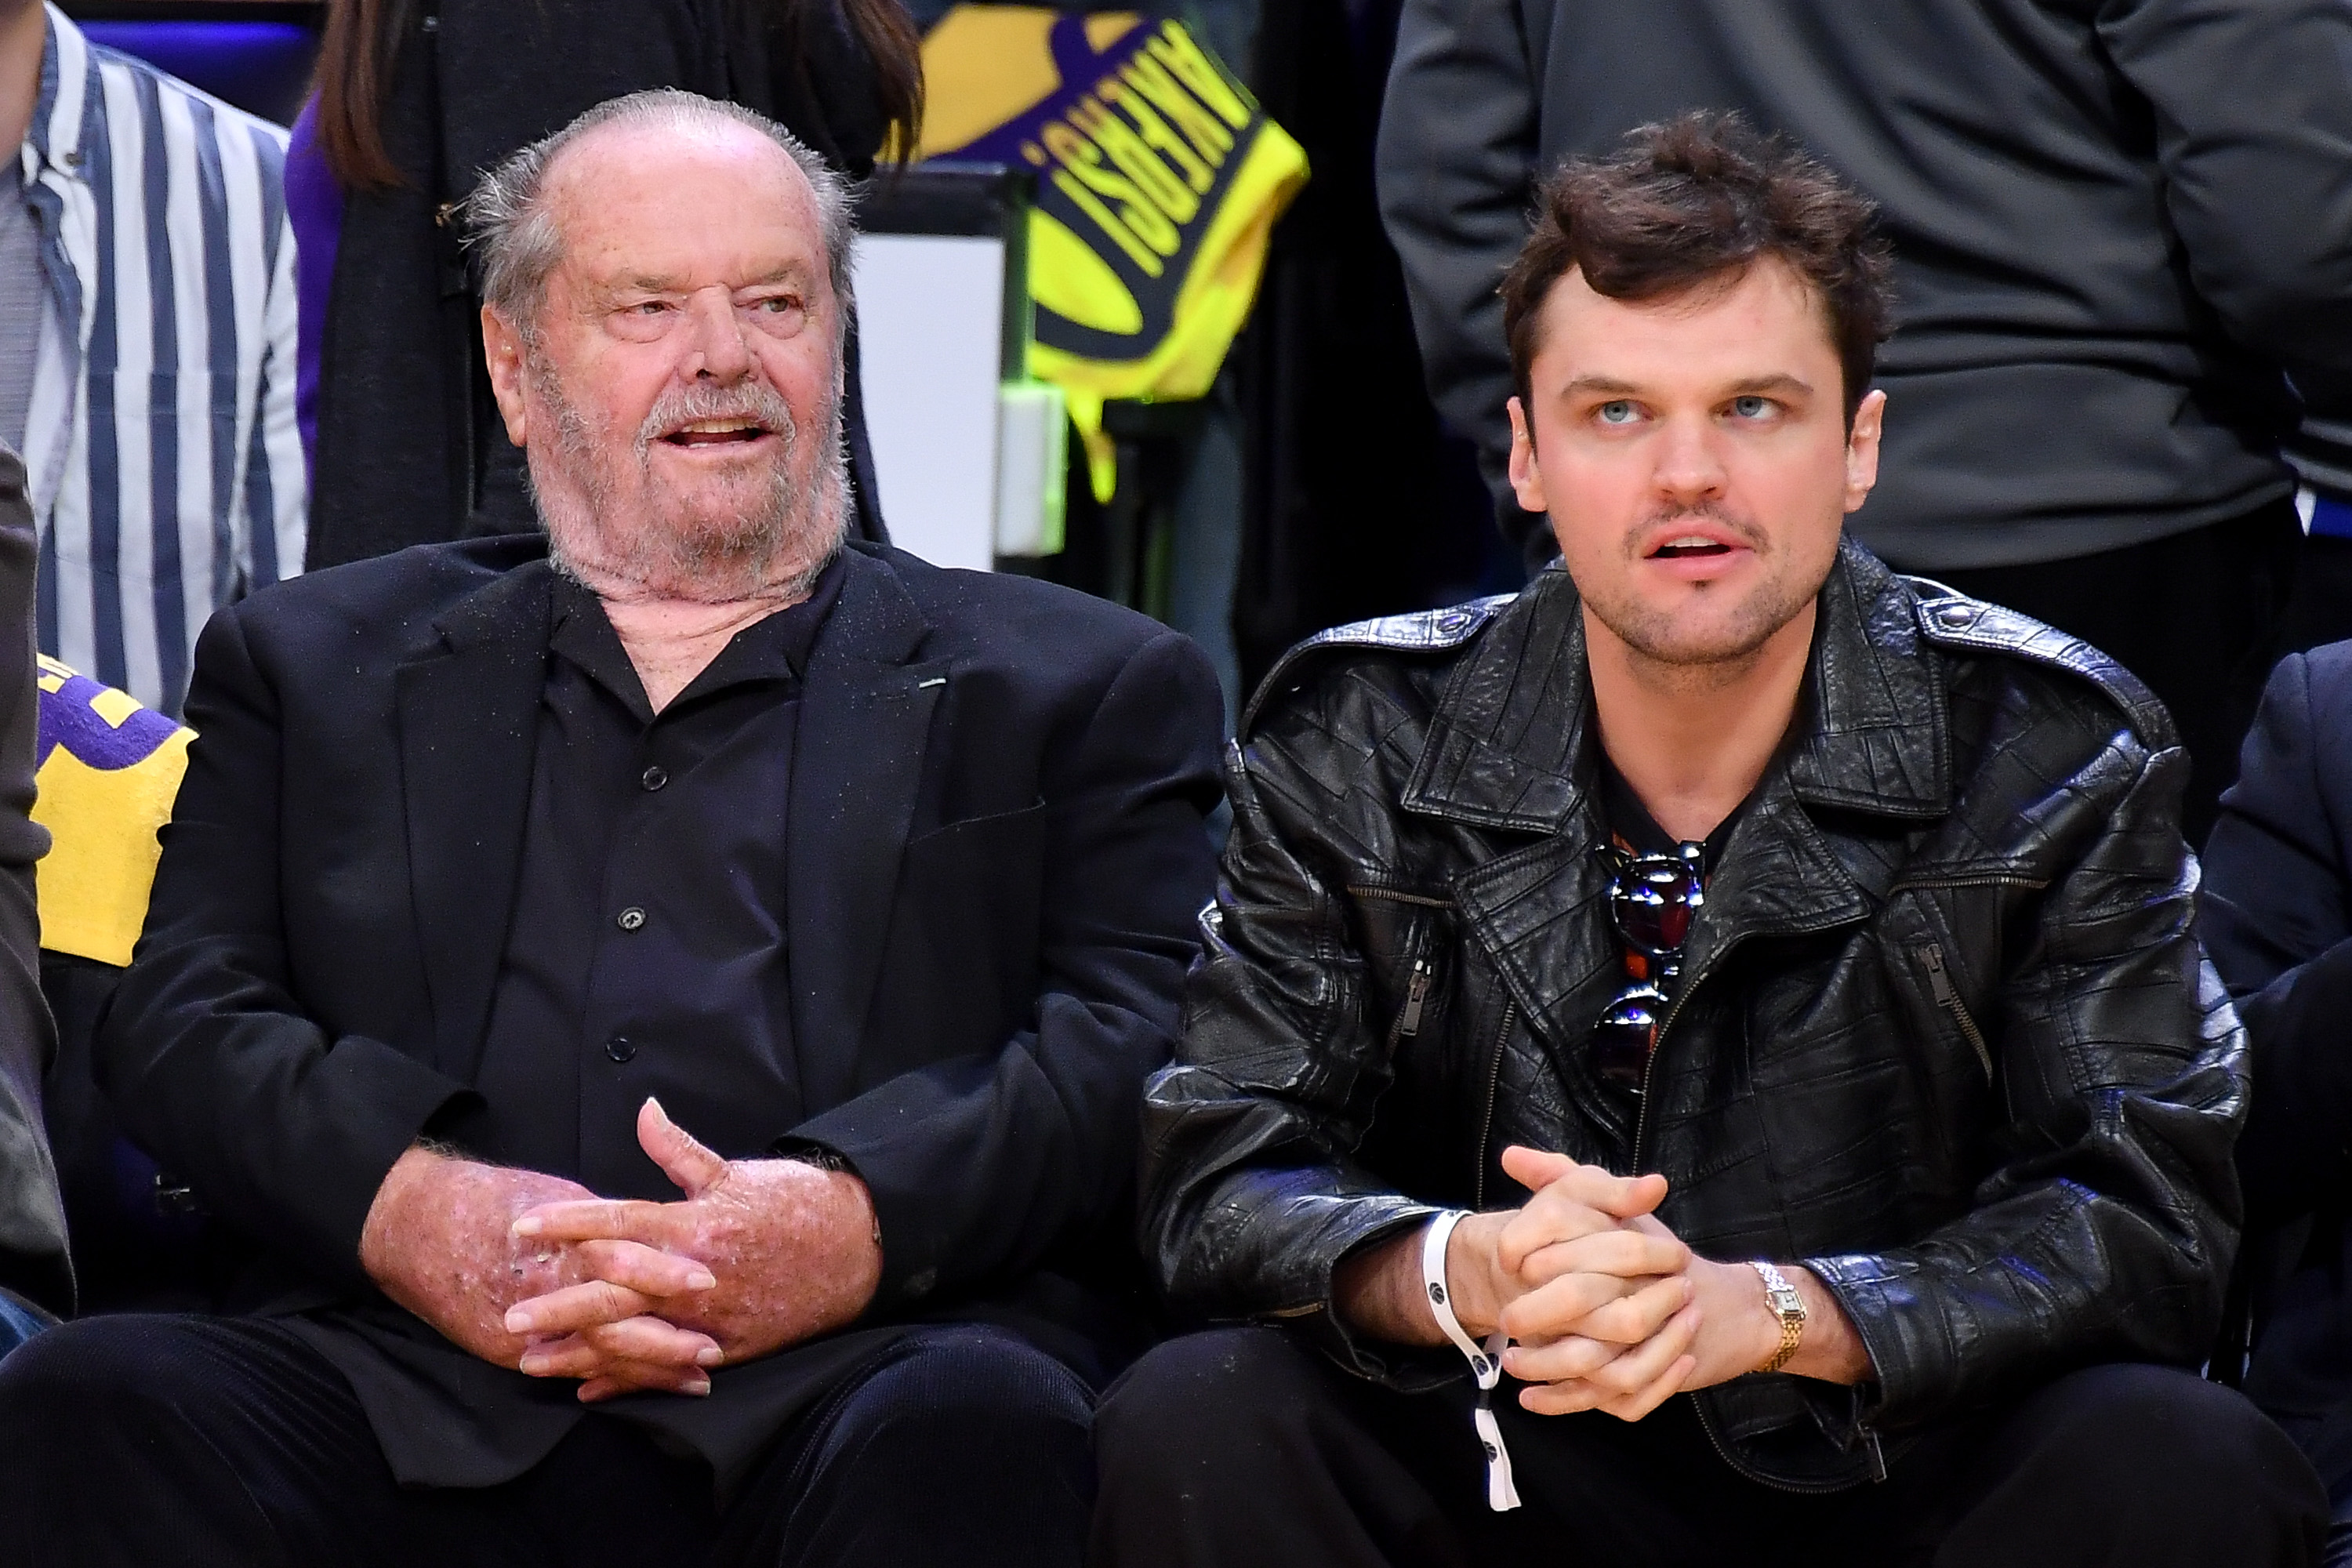 Jack Nicholson and Ray Nicholson attend a playoff basketball game between the Los Angeles Lakers and the Golden State Warriors.